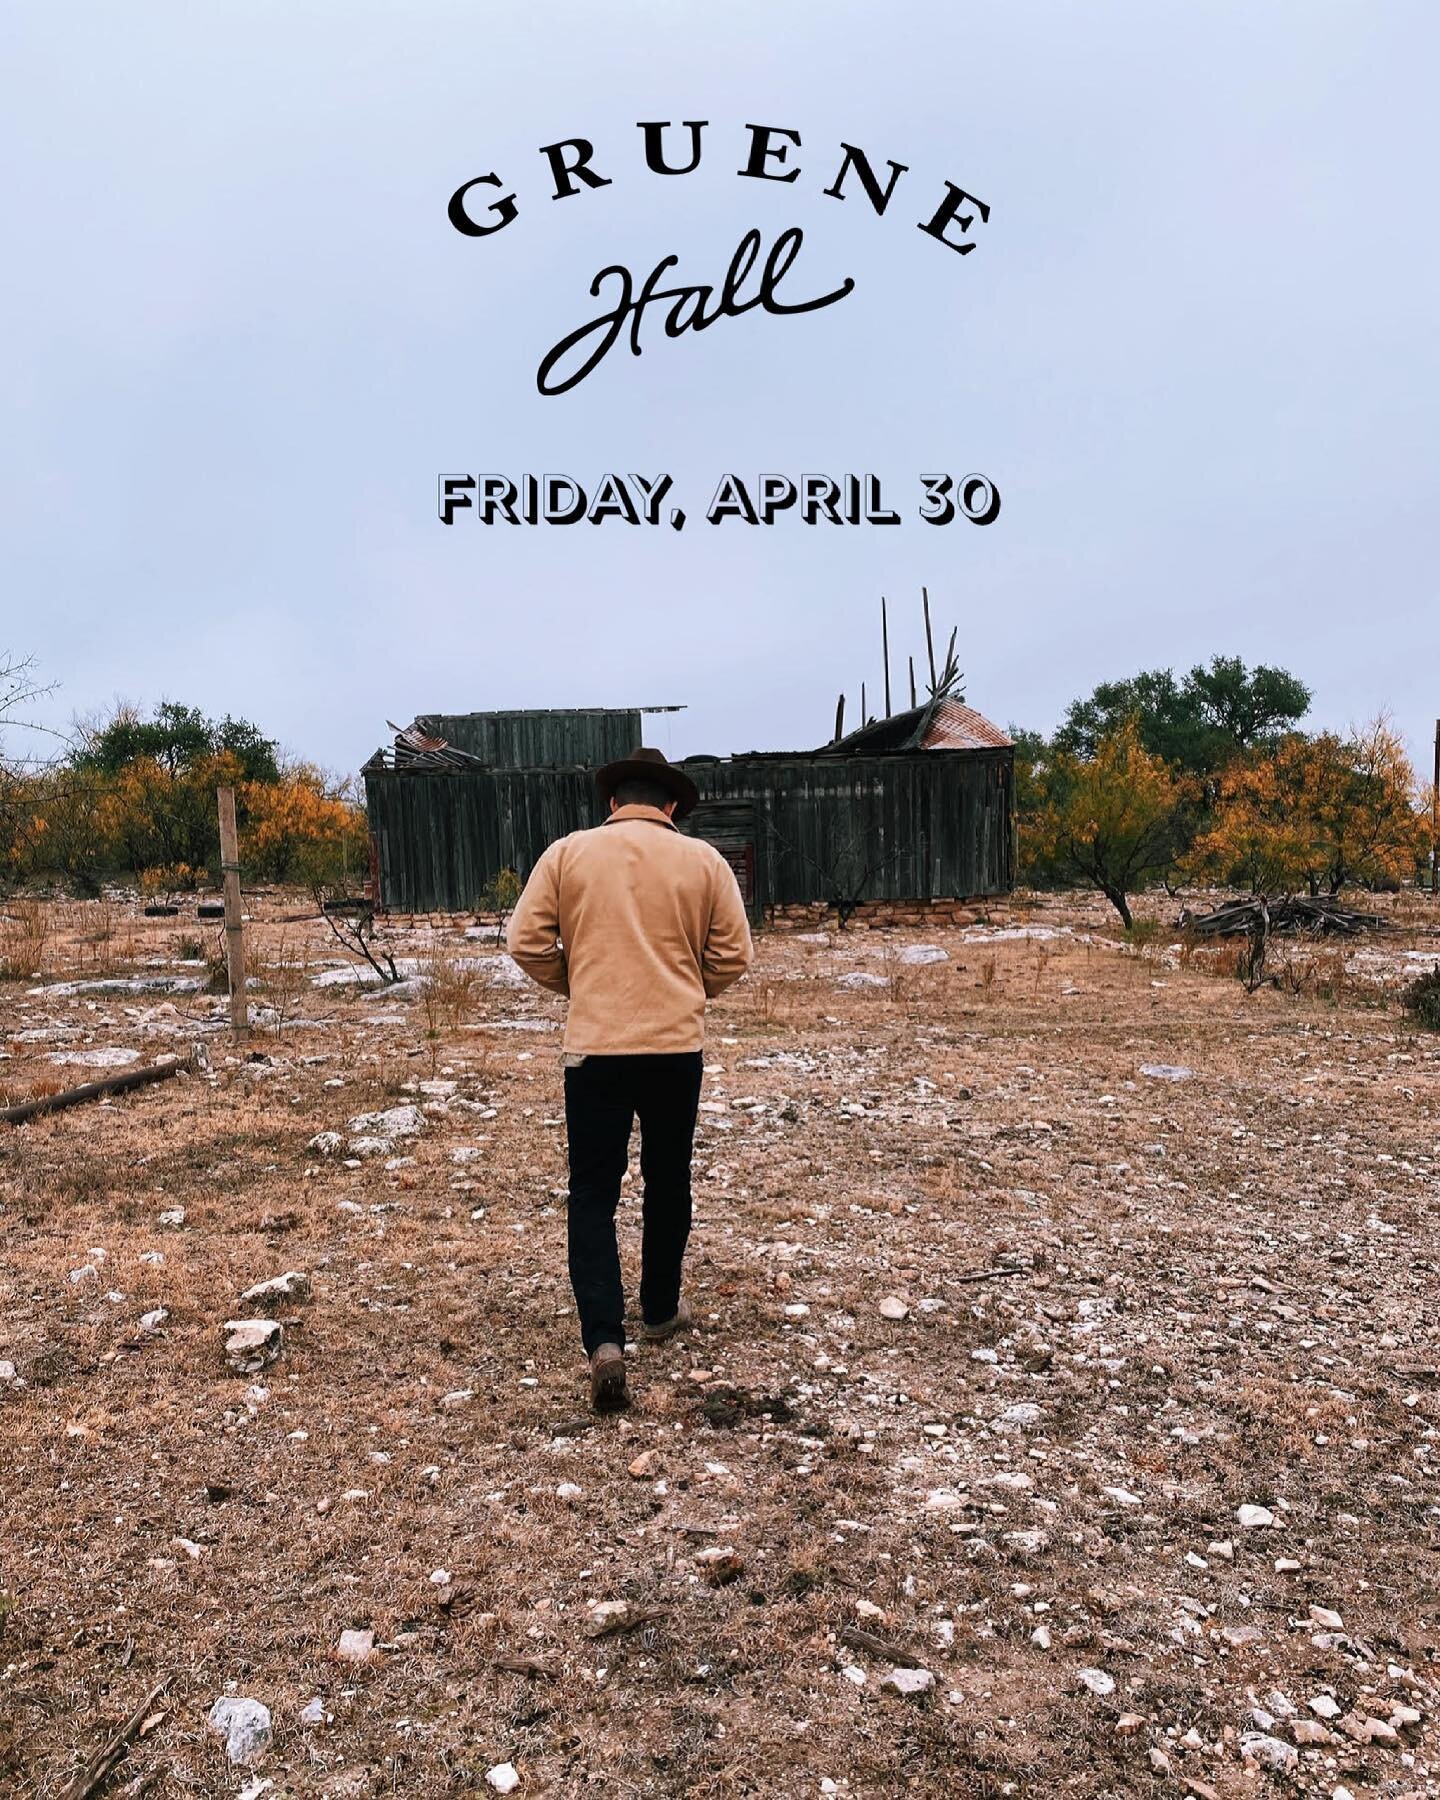 New Braunfels - Friday, April 30 I&rsquo;ll be at @gruenehall for night #2 with @juanathantyler - Tickets on sale now https://gruenehall.thundertix.com/events/185343

See y&rsquo;all there!